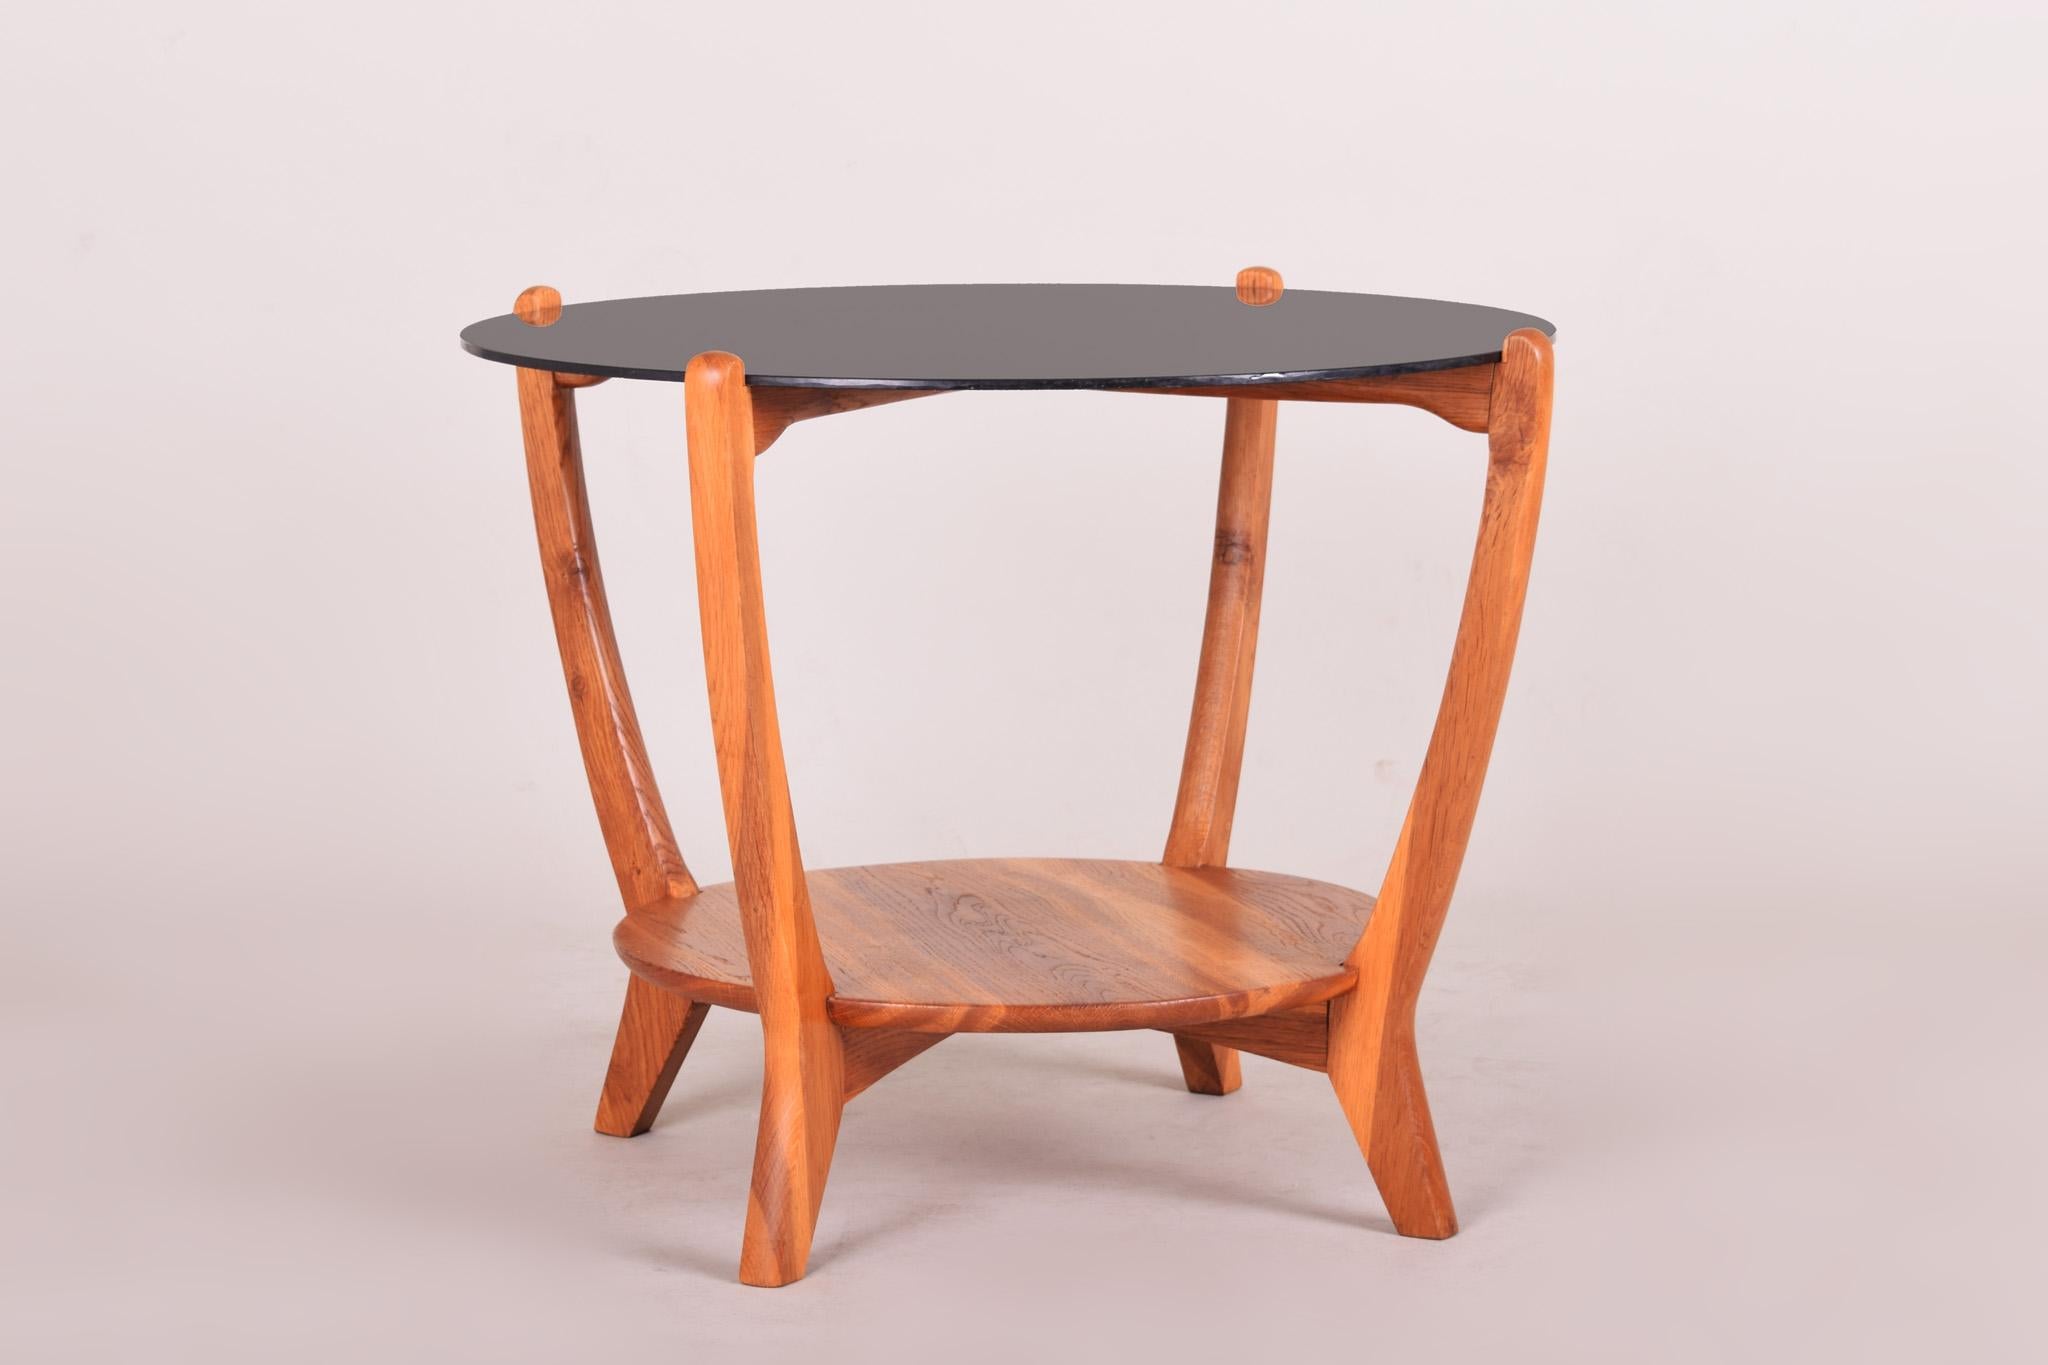 Small table, Czech midcentury, material oak
Period: 1960-1969.